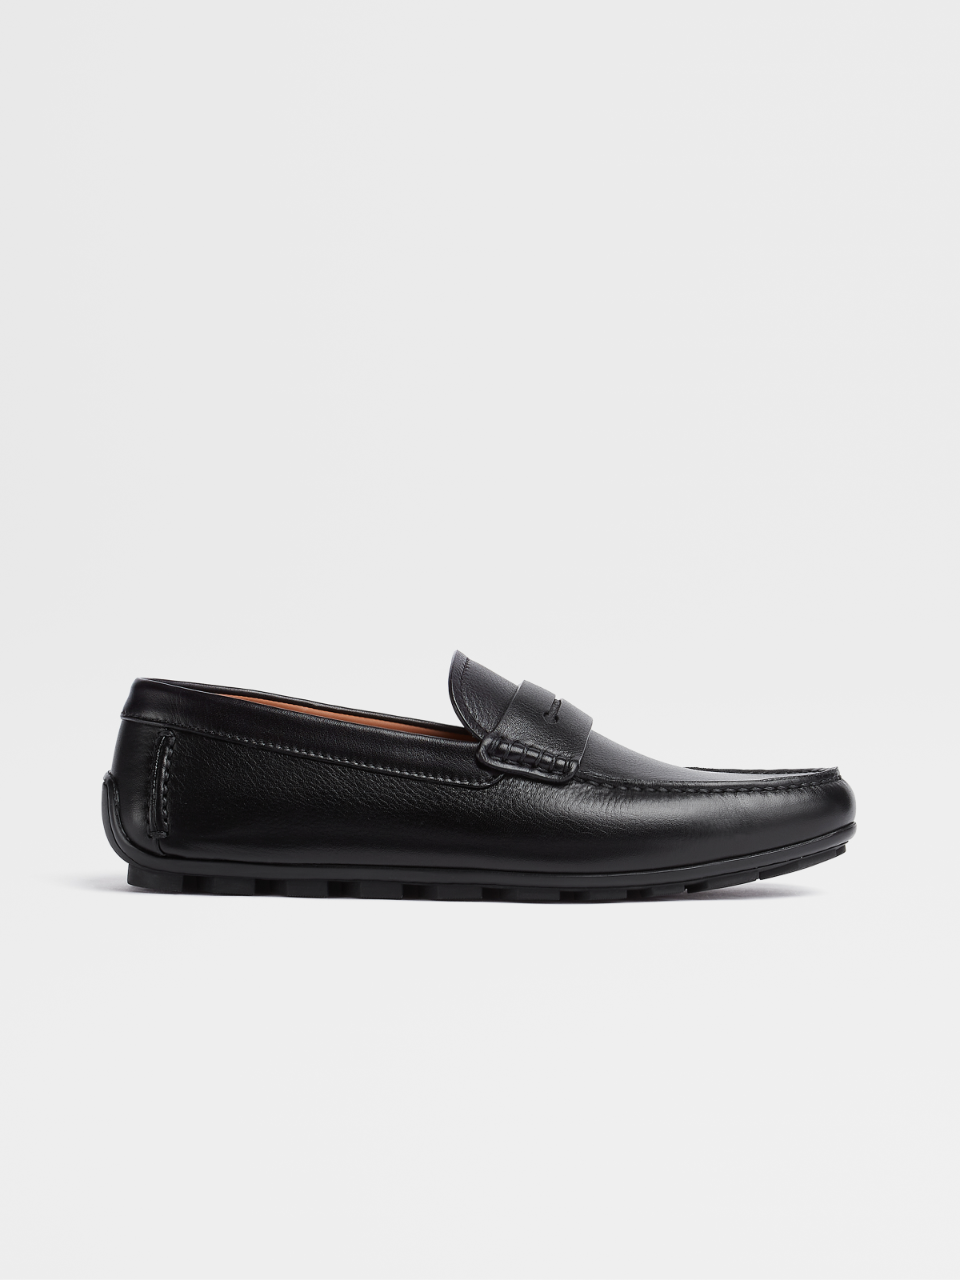 Black Grained Leather Highway Driving Shoe